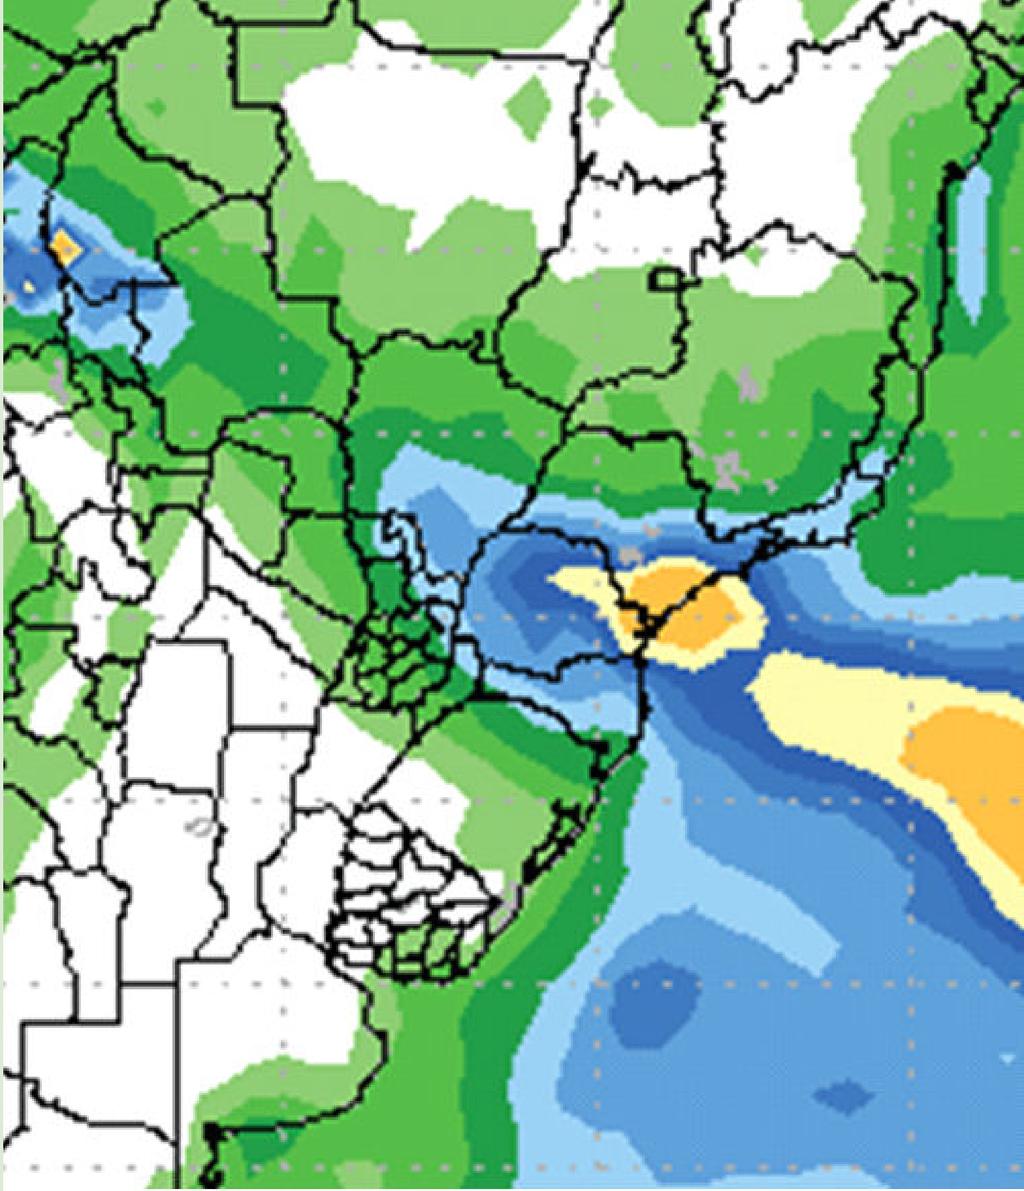 Heavier rains are forecast through central Brazil in the 6 to 10 day outlook, but most of Argentina remains in a dry pattern. Isolated rains could fall on the Argentine coast in this period.